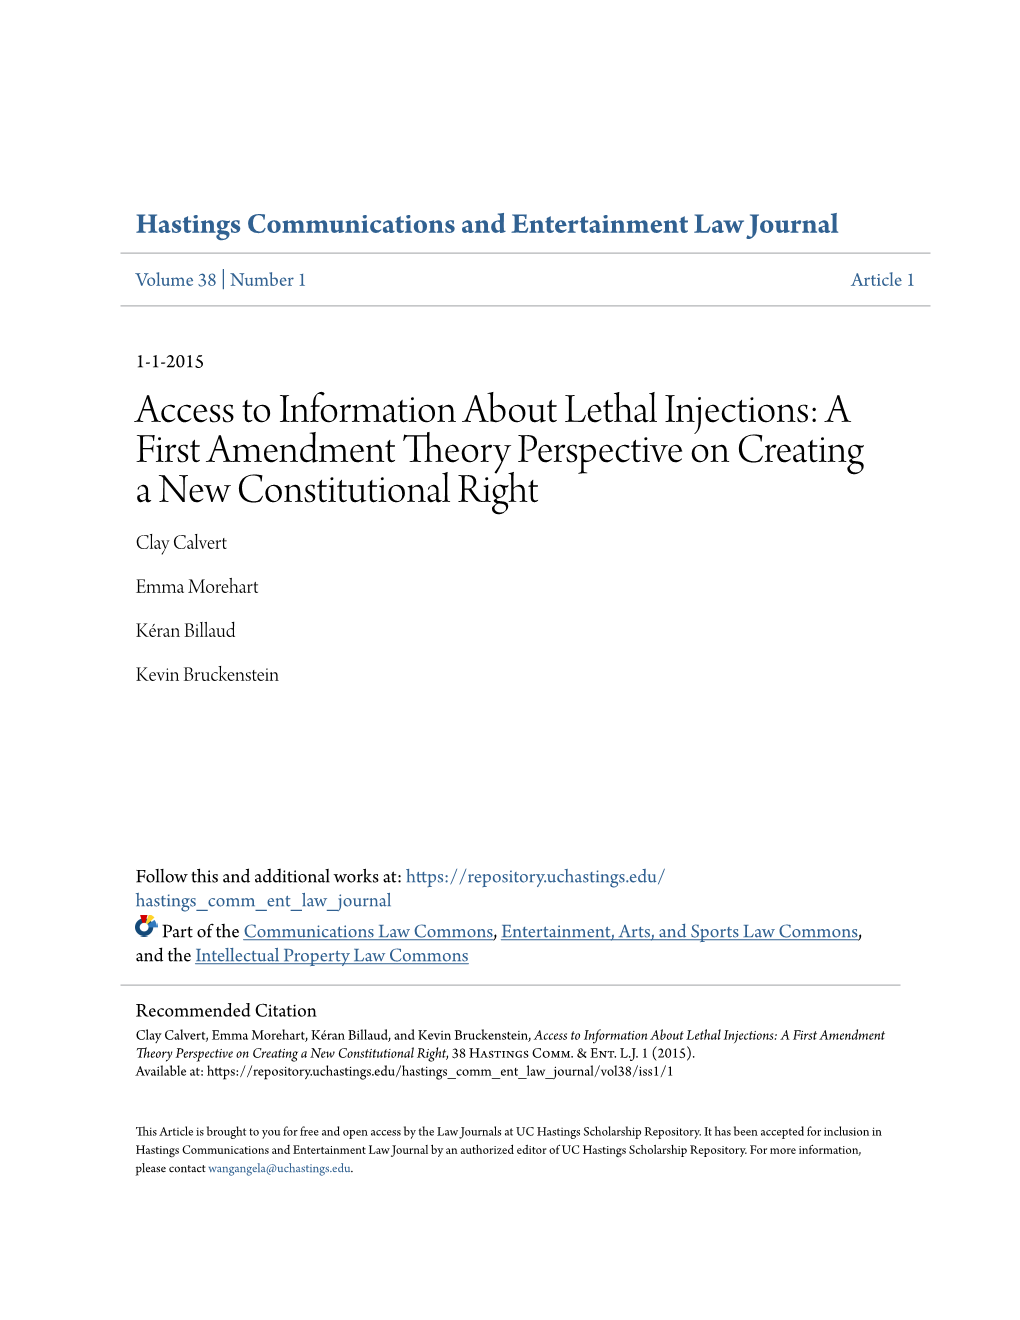 A First Amendment Theory Perspective on Creating a New Constitutional Right Clay Calvert